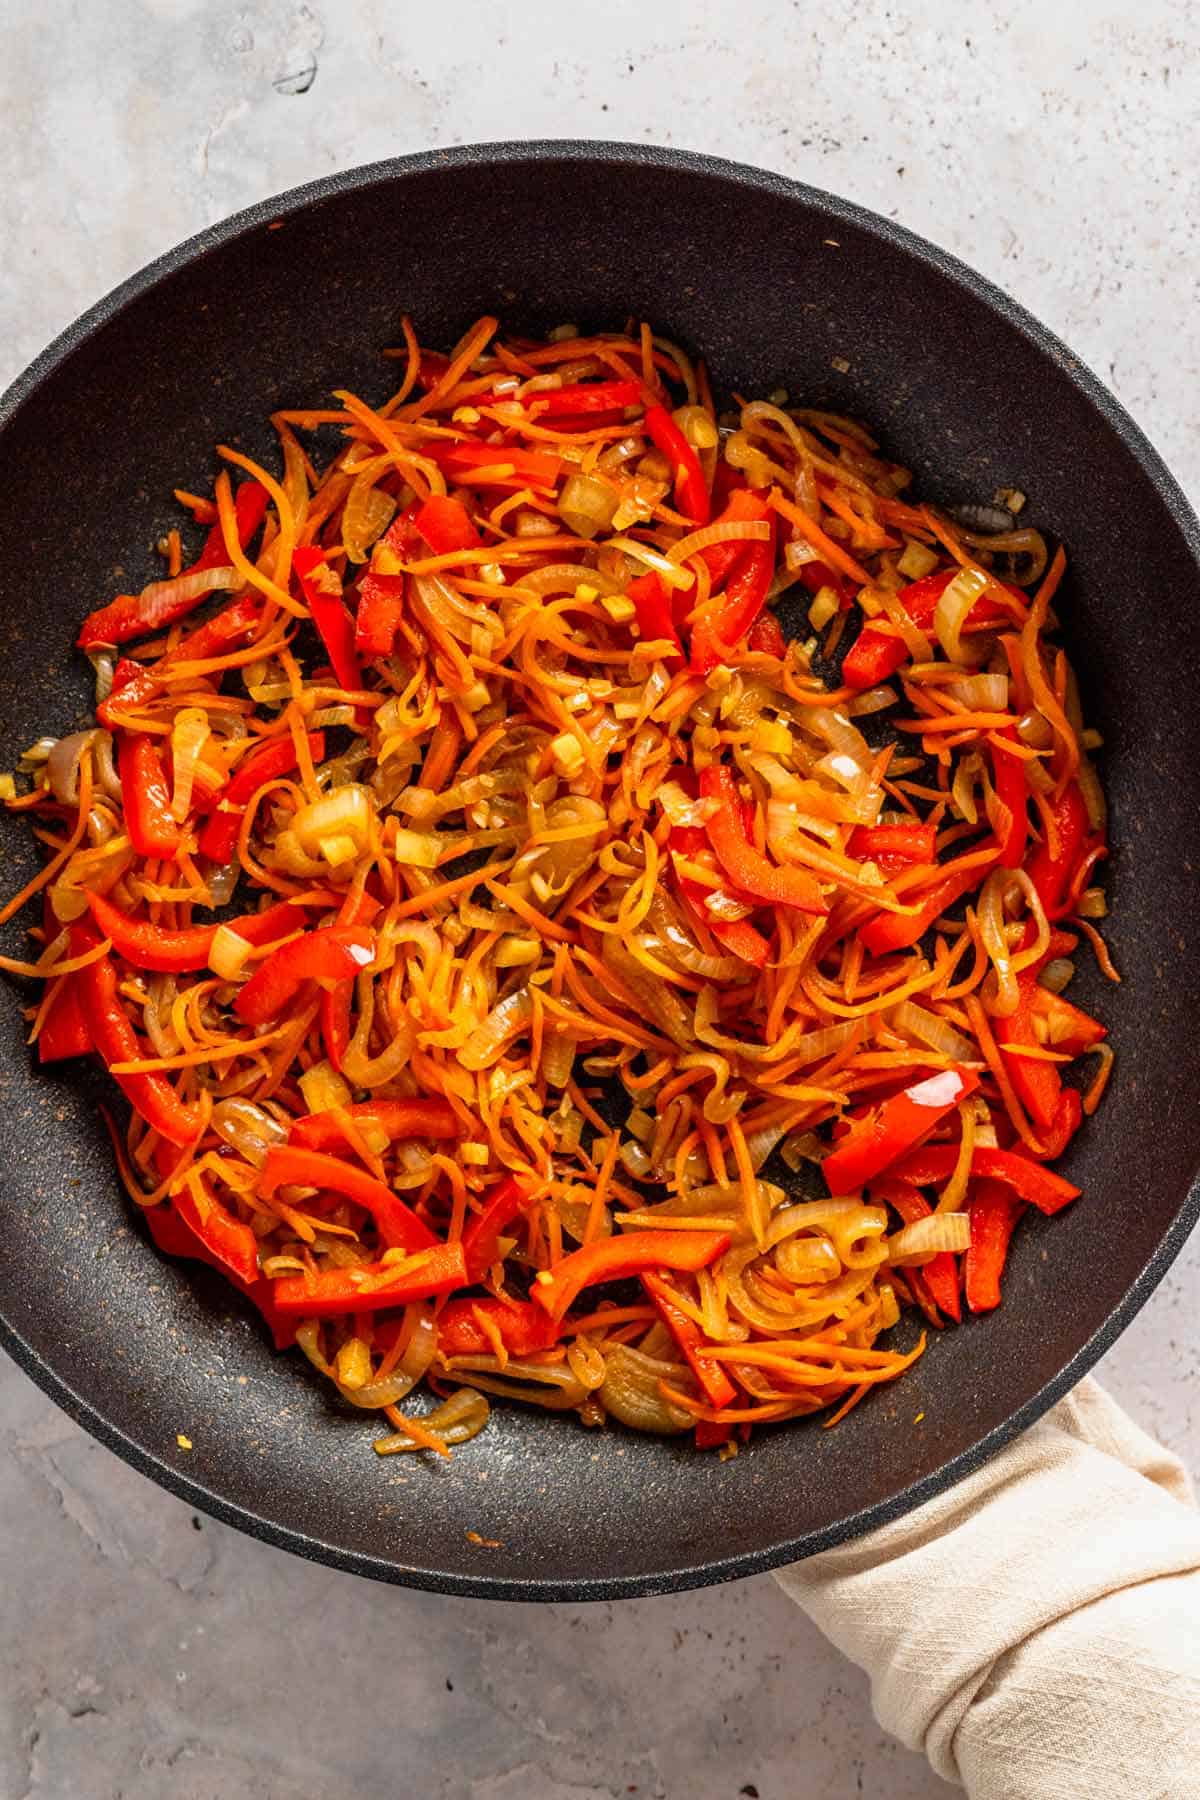 red bell peppers and carrots in skillet.